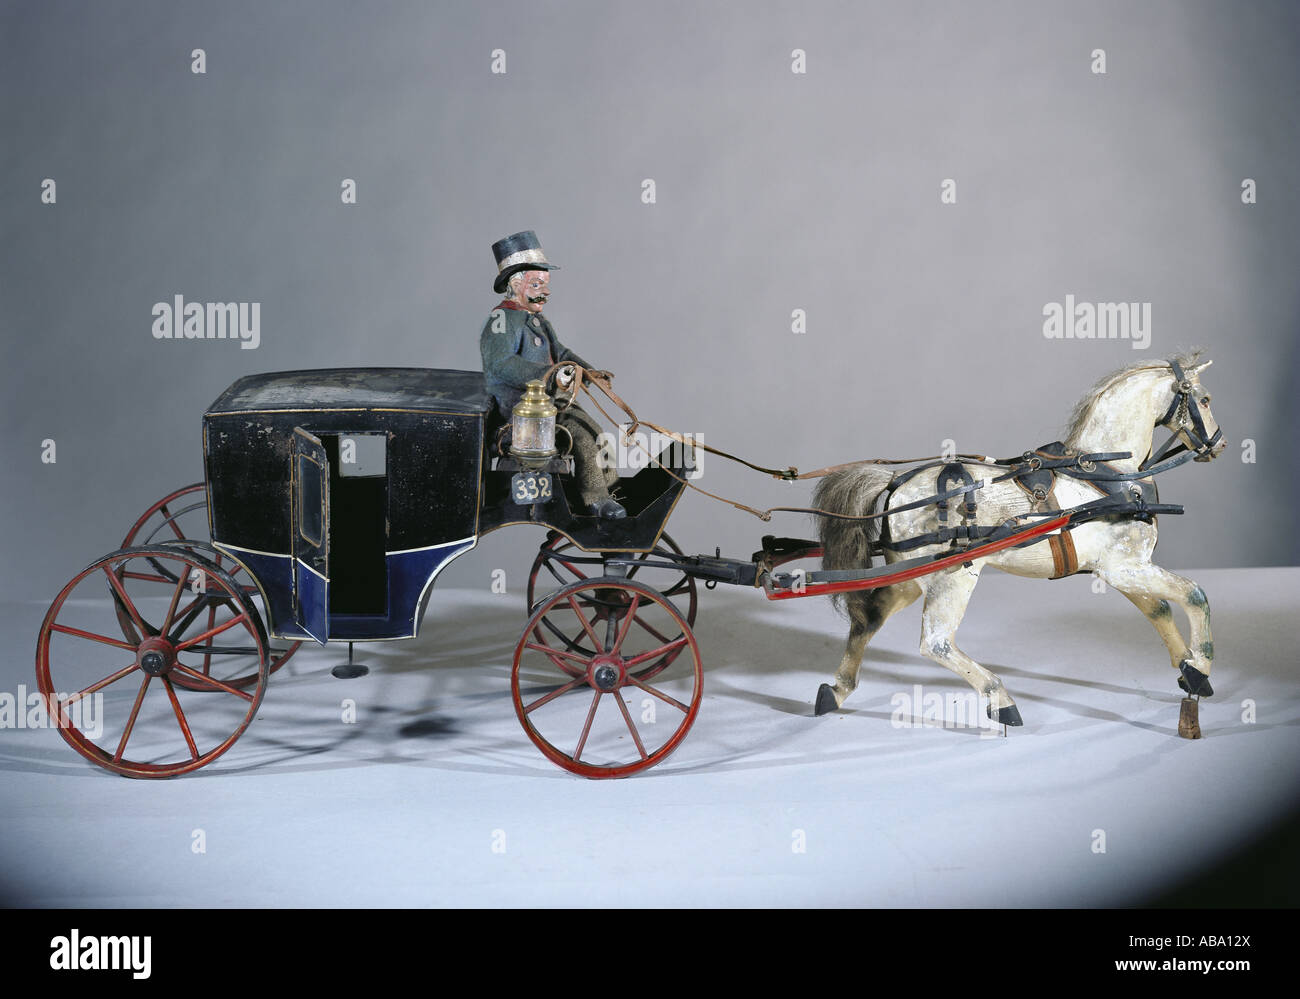 transport/transportation, carriage, Vienna cab, miniature, sheet and wood, Vienna, 2nd half 19th century, Munich City Museum, hackney carriage, taxi, driver, one horse carriage, Austria, historic, historical, people, Stock Photo